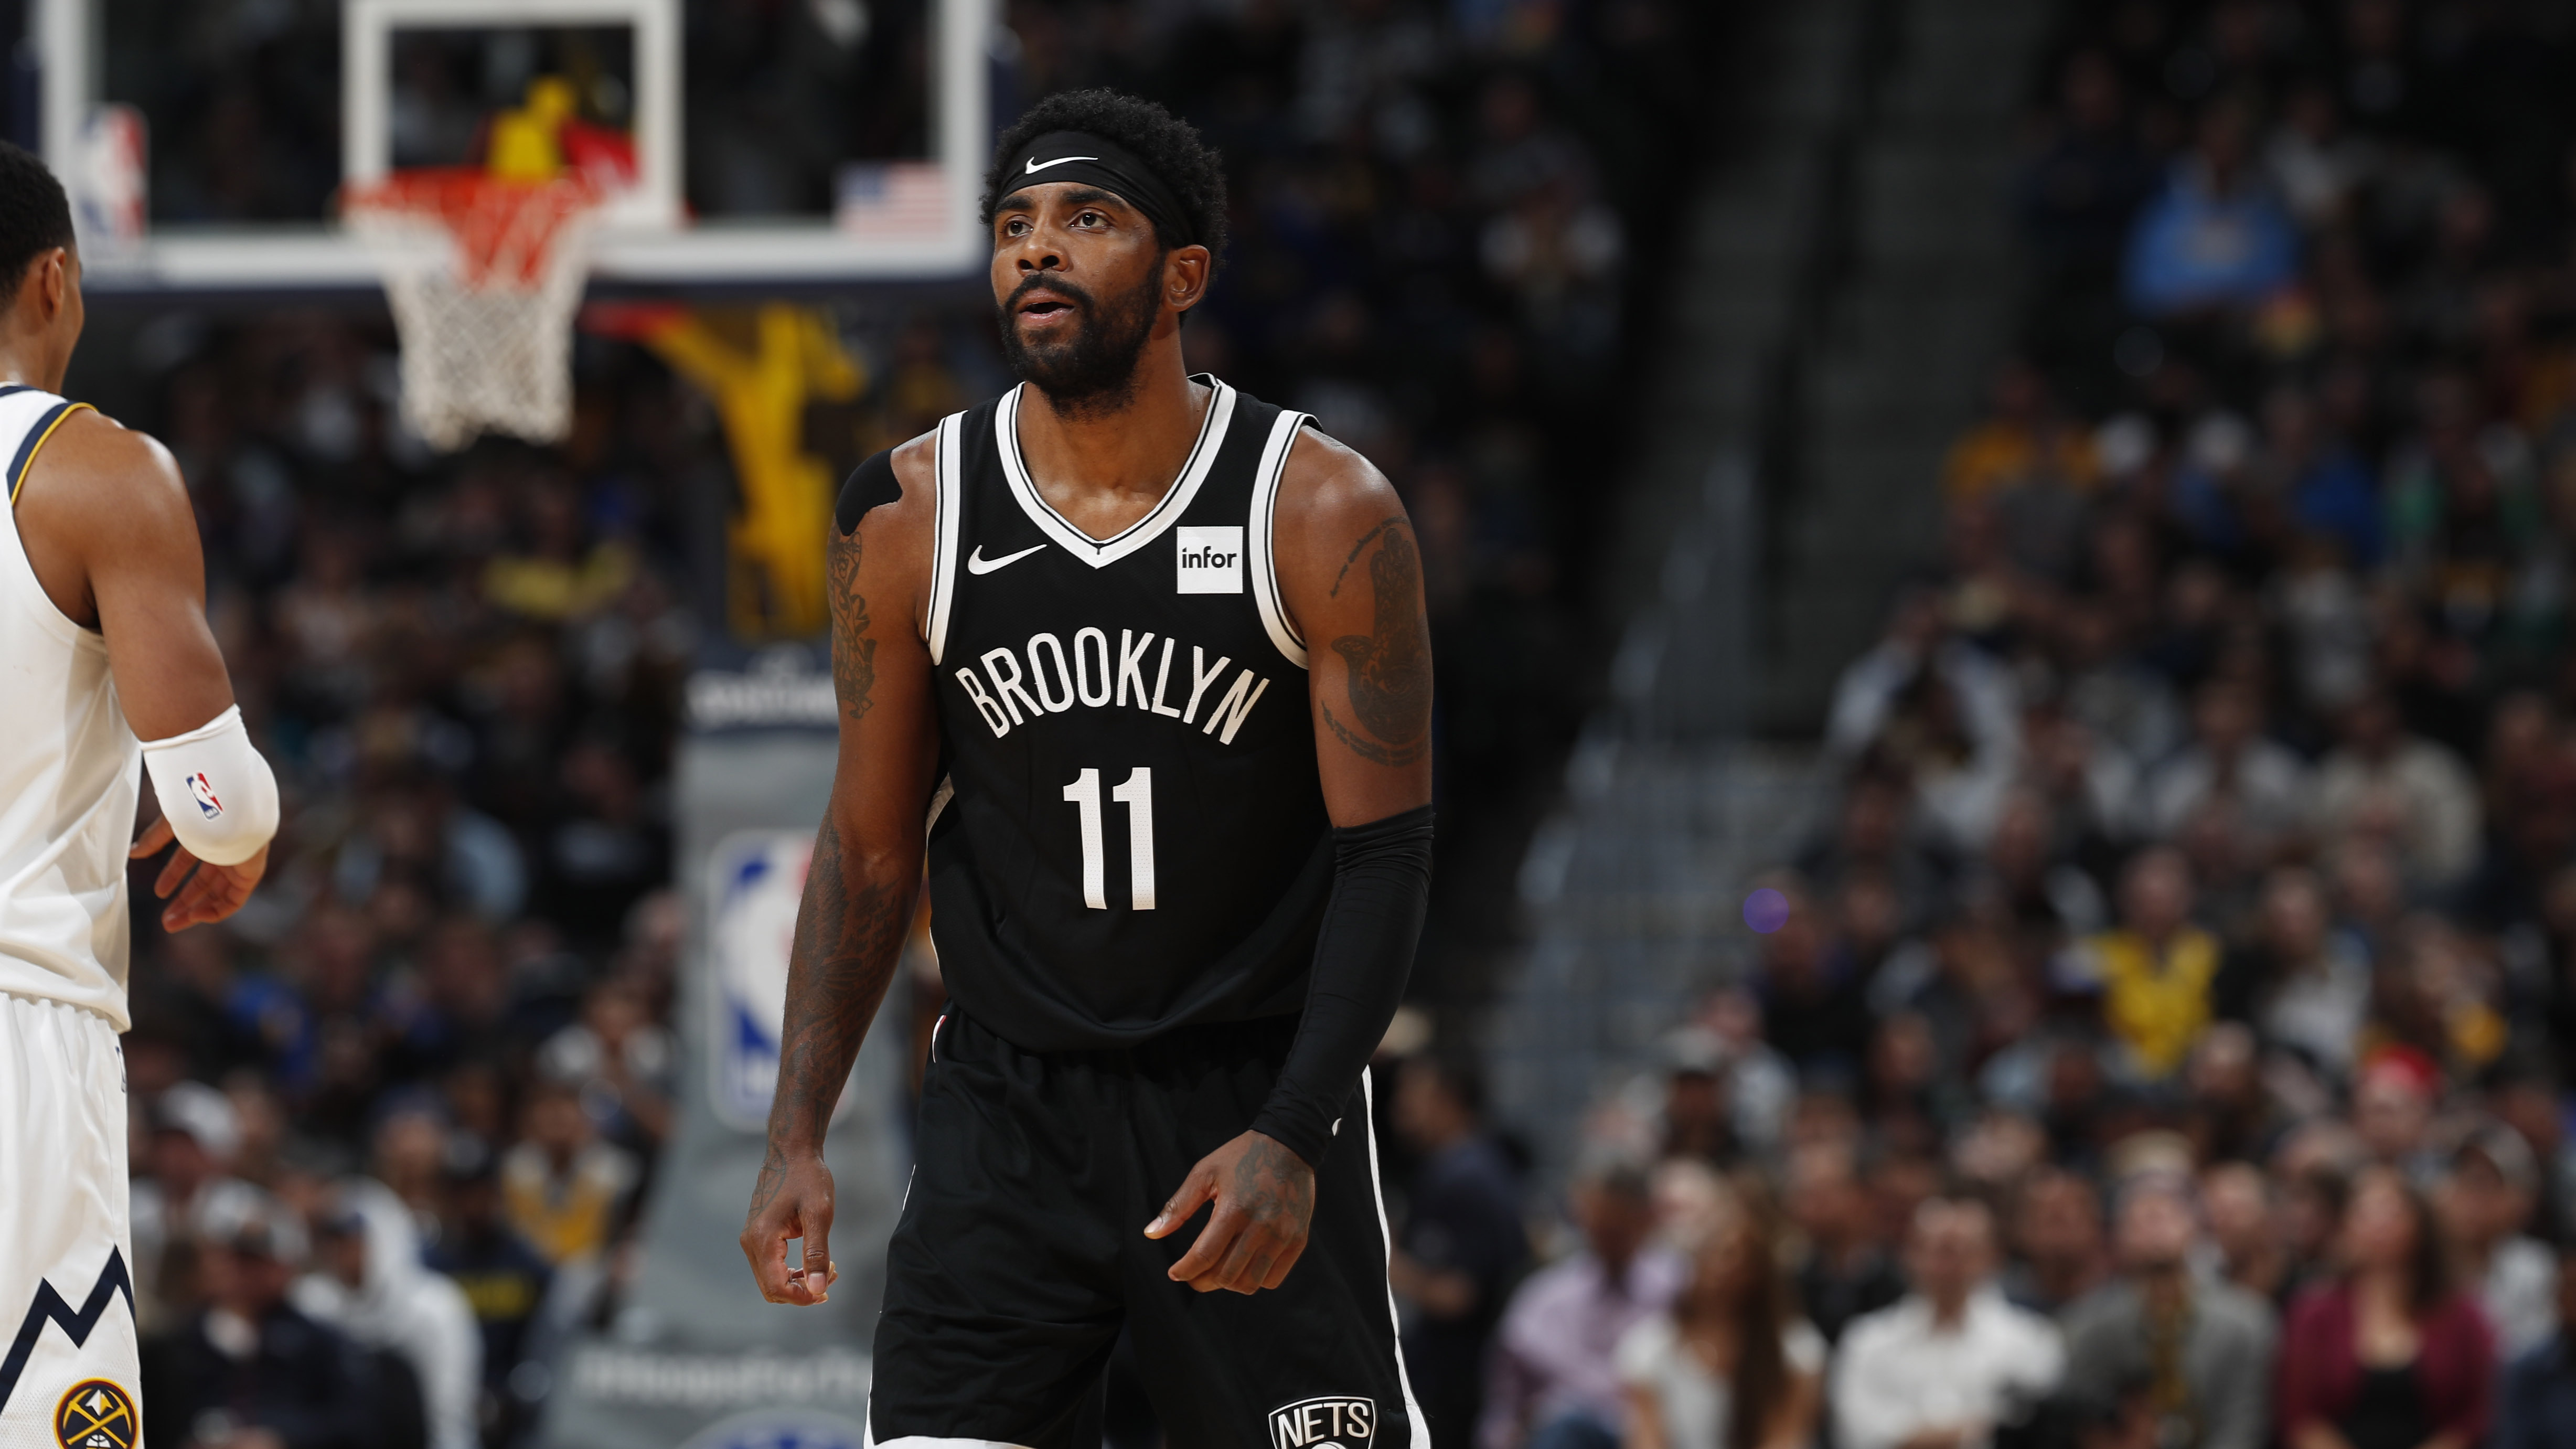 key mentor of Nets Kyrie Irving 